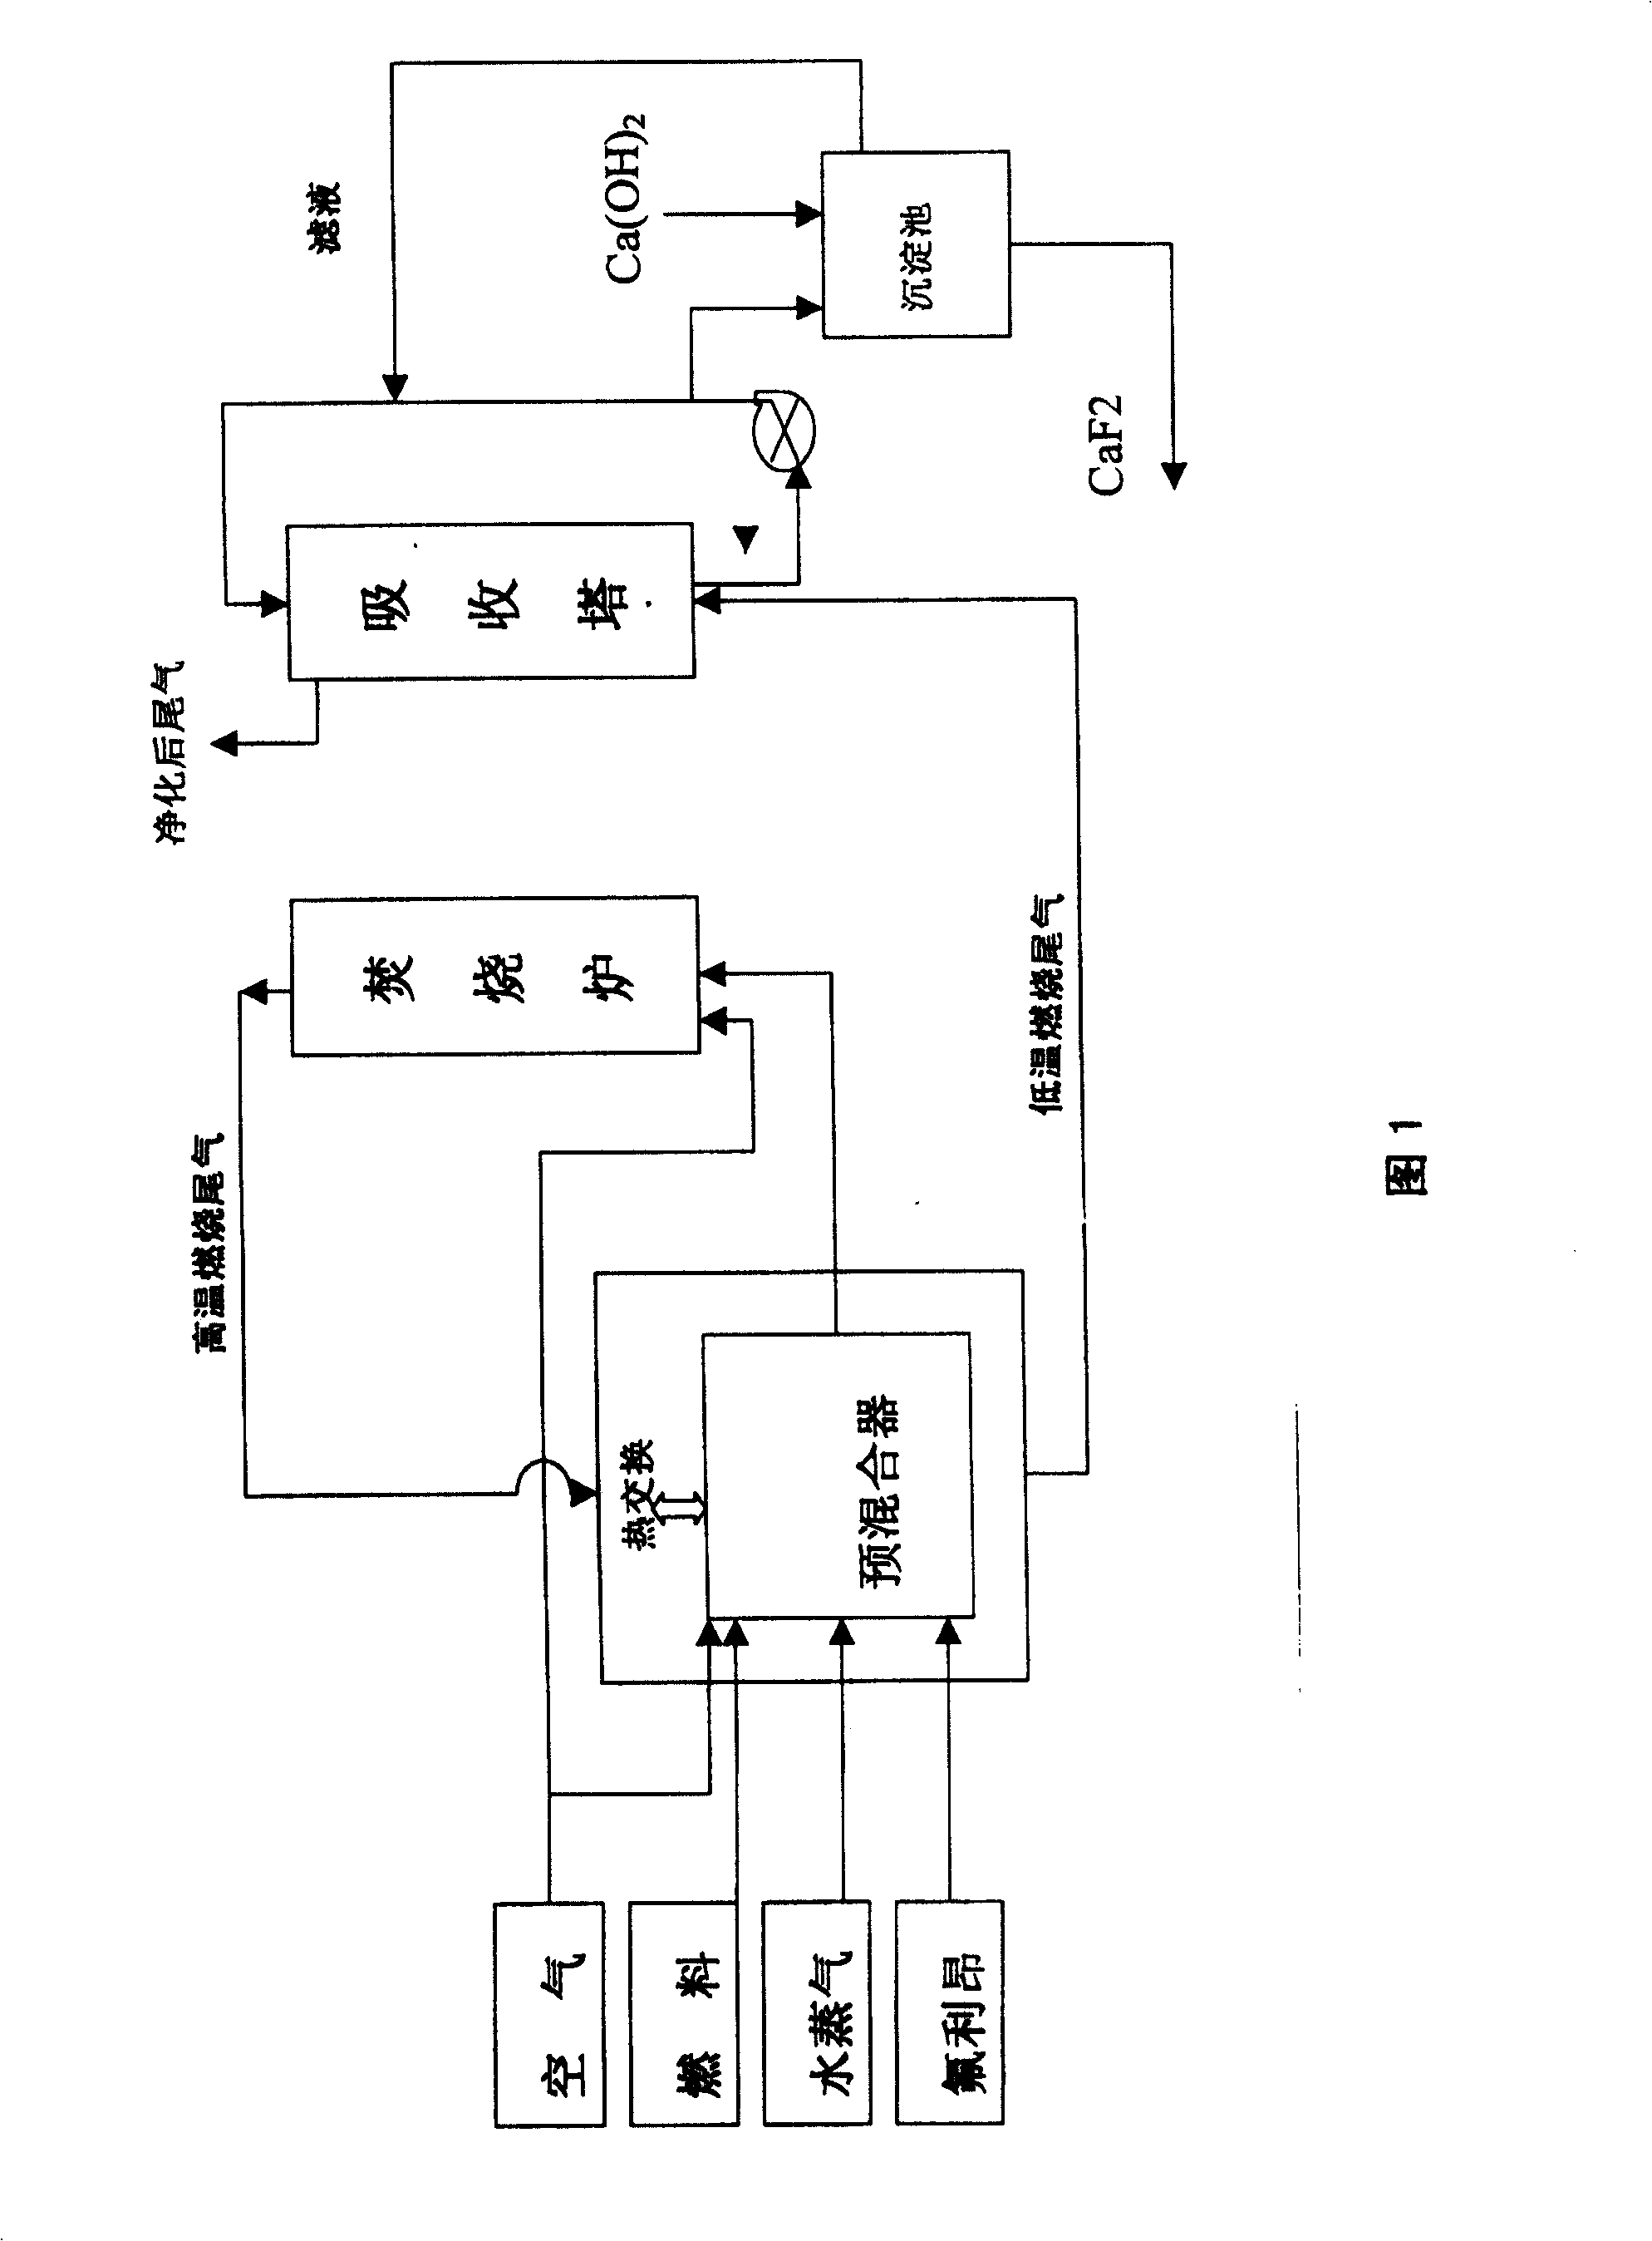 Freon treated by premixed combustion and method for producing said resource